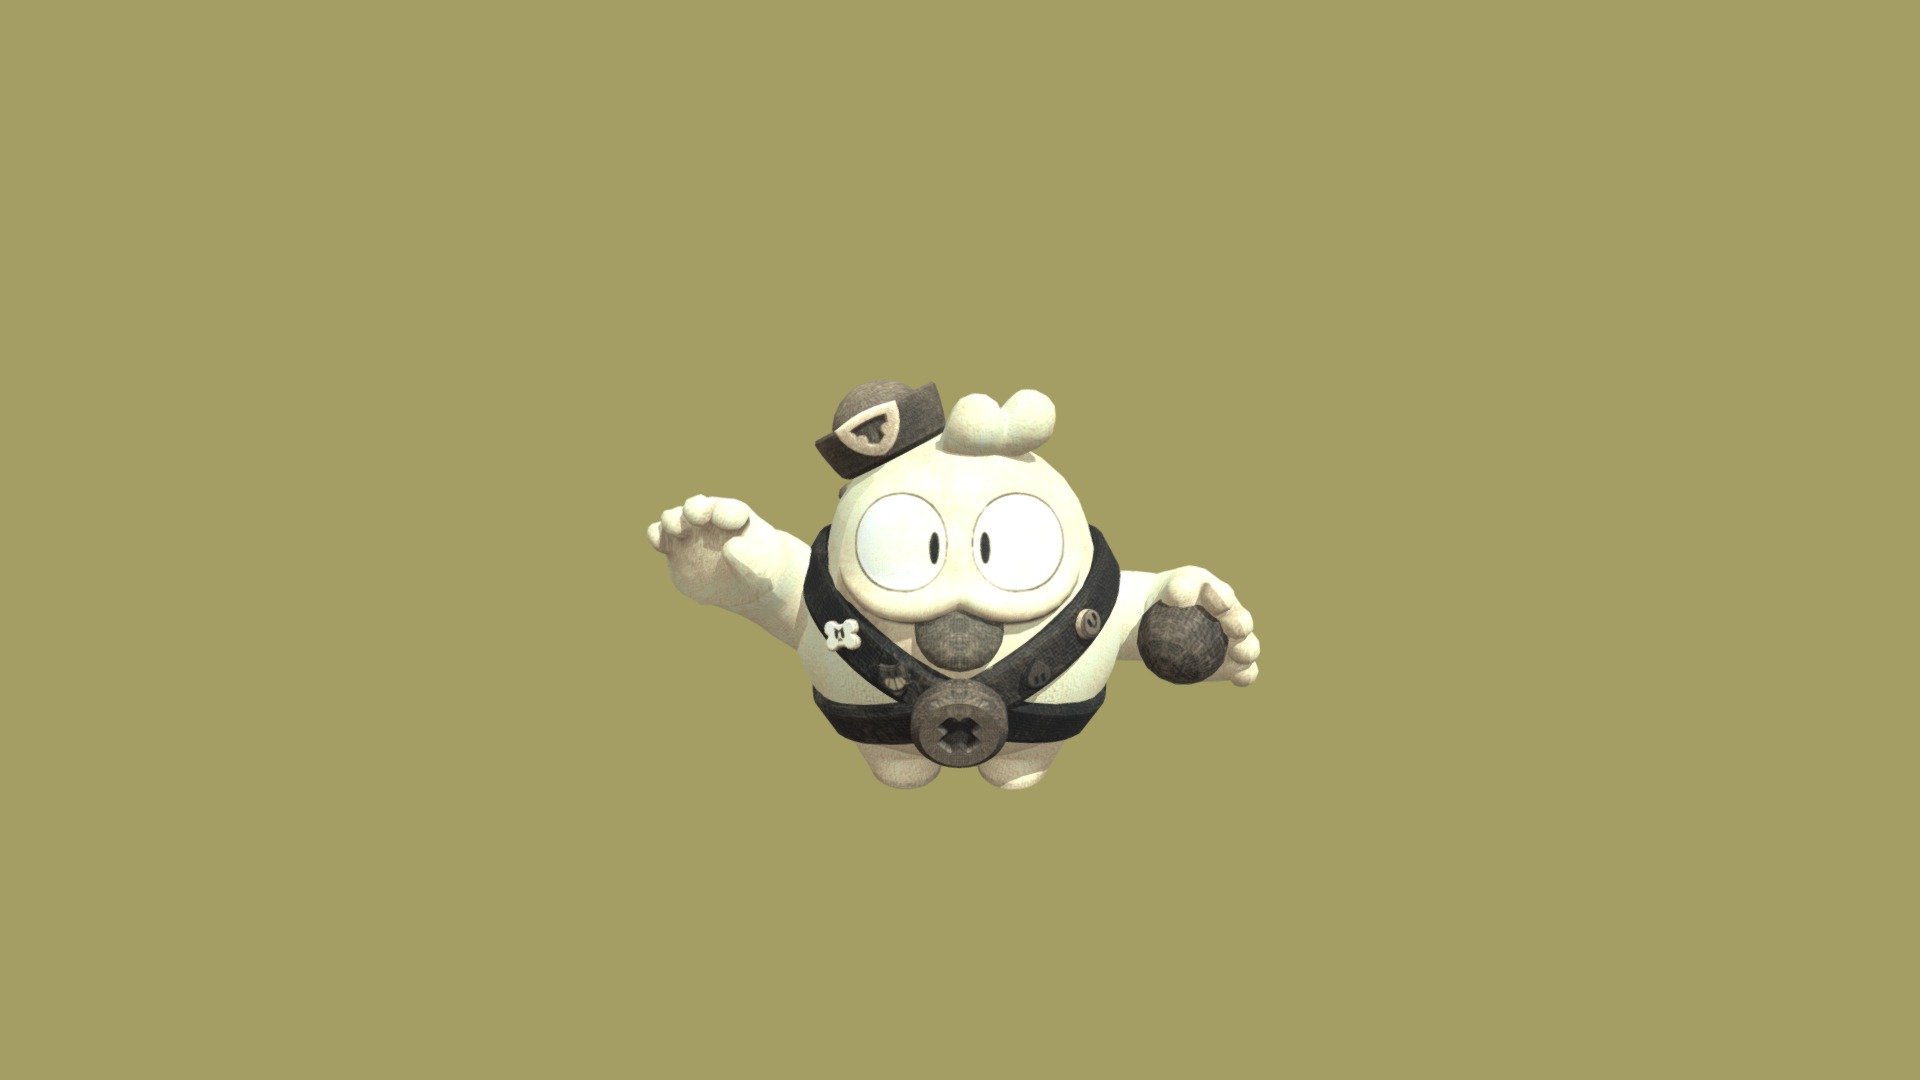 Posed Squeak Old Style Brawl Stars Free 3D model by Onilak24 [6bfea08]